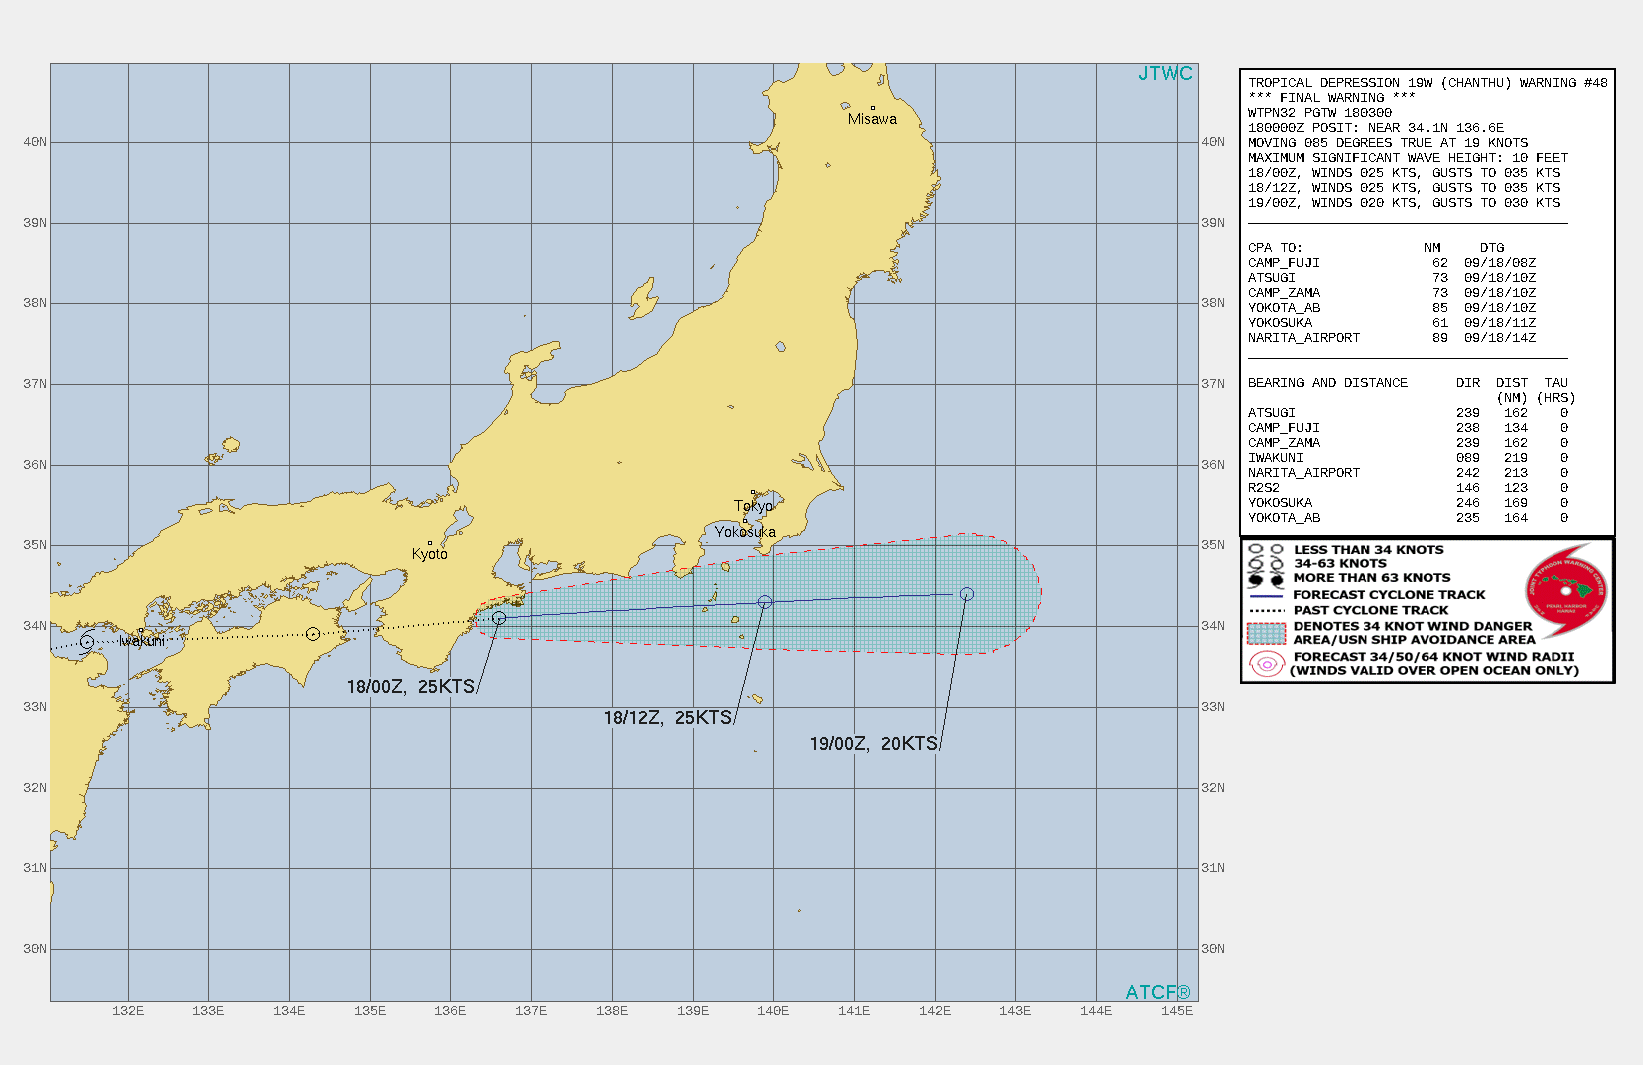 REMNANTS OF TD 19W(CHANTHU). WARNING 48/FINAL ISSUED AT 18/03UTC.TROPICAL DEPRESSION 19W (CHANTHU), LOCATED APPROXIMATELY  310 KM WEST-SOUTHWEST OF YOKOSUKA, JAPAN, HAS TRACKED EASTWARD AT 35 KM/H OVER THE PAST SIX HOURS. ANIMATED MULTISPECTRAL SATELLITE  IMAGERY SHOWS THE SYSTEM CONTINUED TO RAPIDLY WEAKEN AS THE  ASSOCIATED CONVECTION HAVE BECOME SHEARED AND FRAGMENTED. THE LOW  LEVEL CIRCULATION HAS BEEN DIFFICULT TO LOCATE USING SATELLITE AND  COMPOSITE RADAR IMAGERY. THE INITIAL POSITION, JUST OFFSHORE FROM  SOUTHERN HONSHU, IS PLACED WITH MEDIUM CONFIDENCE BY EXTRAPOLATION  FROM NEARBY SURFACE OBSERVATIONS, INCLUDING OWASE AND SHIONOMISAKI.  THE INITIAL INTENSITY OF 25KNOTS IS ALSO EXTRAPOLATED FROM NEARBY WIND  AND SEA LEVEL PRESSURE OBSERVATIONS AND SUPPORTED BY THE DVORAK  ESTIMATE OF T1.5/25KTS FROM RJTD. TD 19W IS UNDERGOING EXTRA- TROPICAL TRANSITION AND WILL BECOME A COLD CORE LOW BY 12H AS IT  CONTINUES EASTWARD INTO THE PACIFIC OCEAN. THIS IS THE FINAL WARNING  ON THIS SYSTEM BY THE JOINT TYPHOON WRNCEN PEARL HARBOR HI.